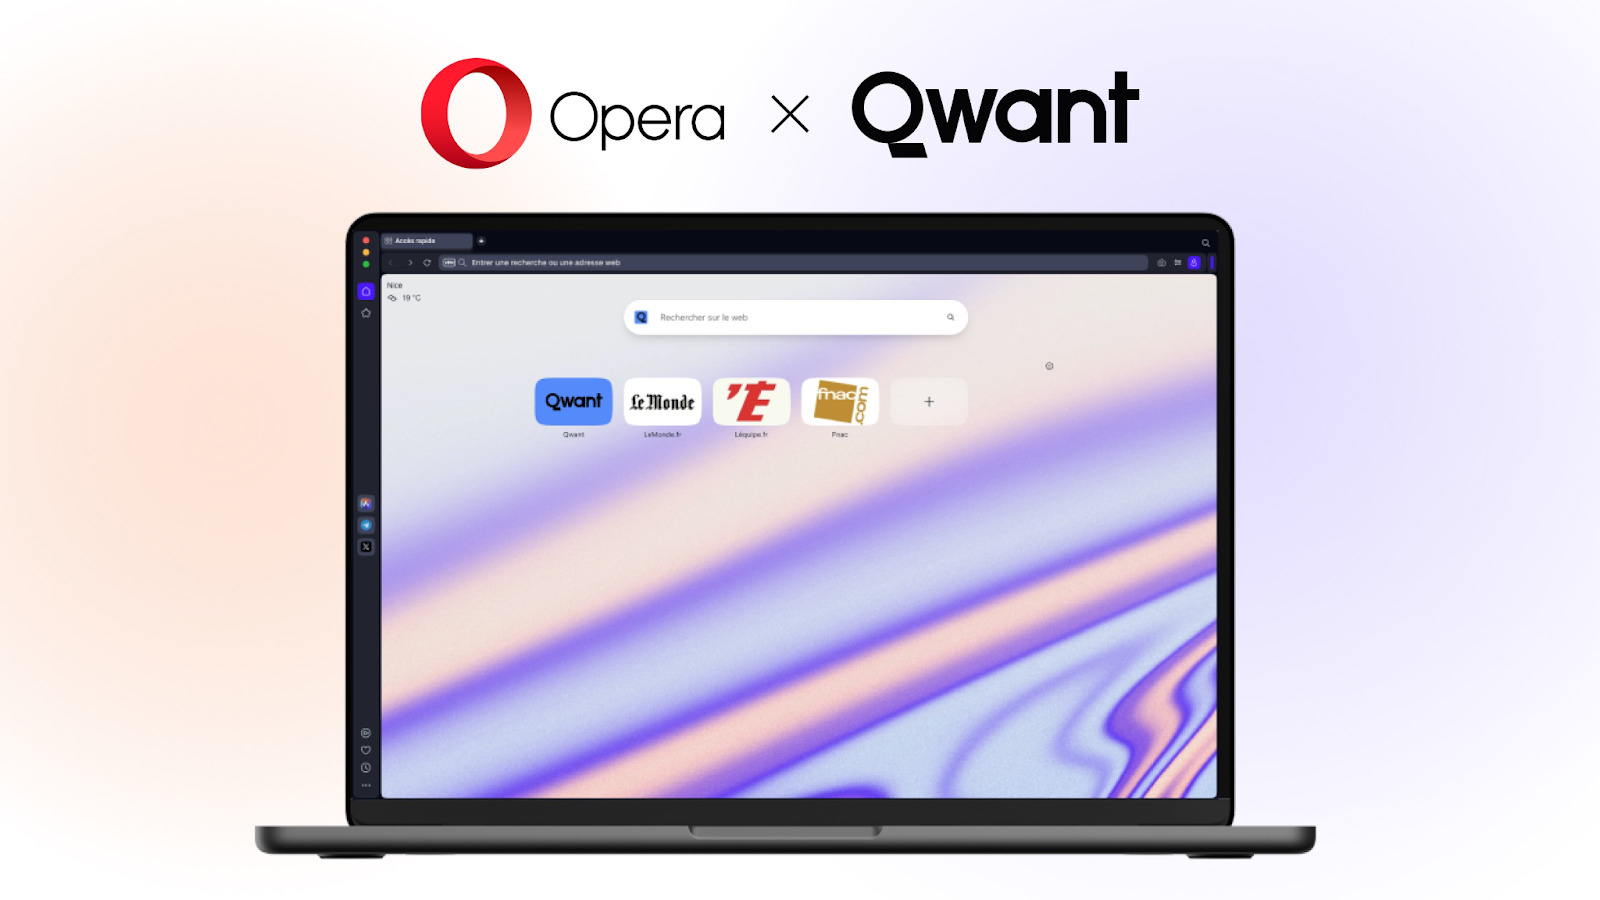 A laptop screen shows Opera's custom built with Qwant integrated as the default search engine.